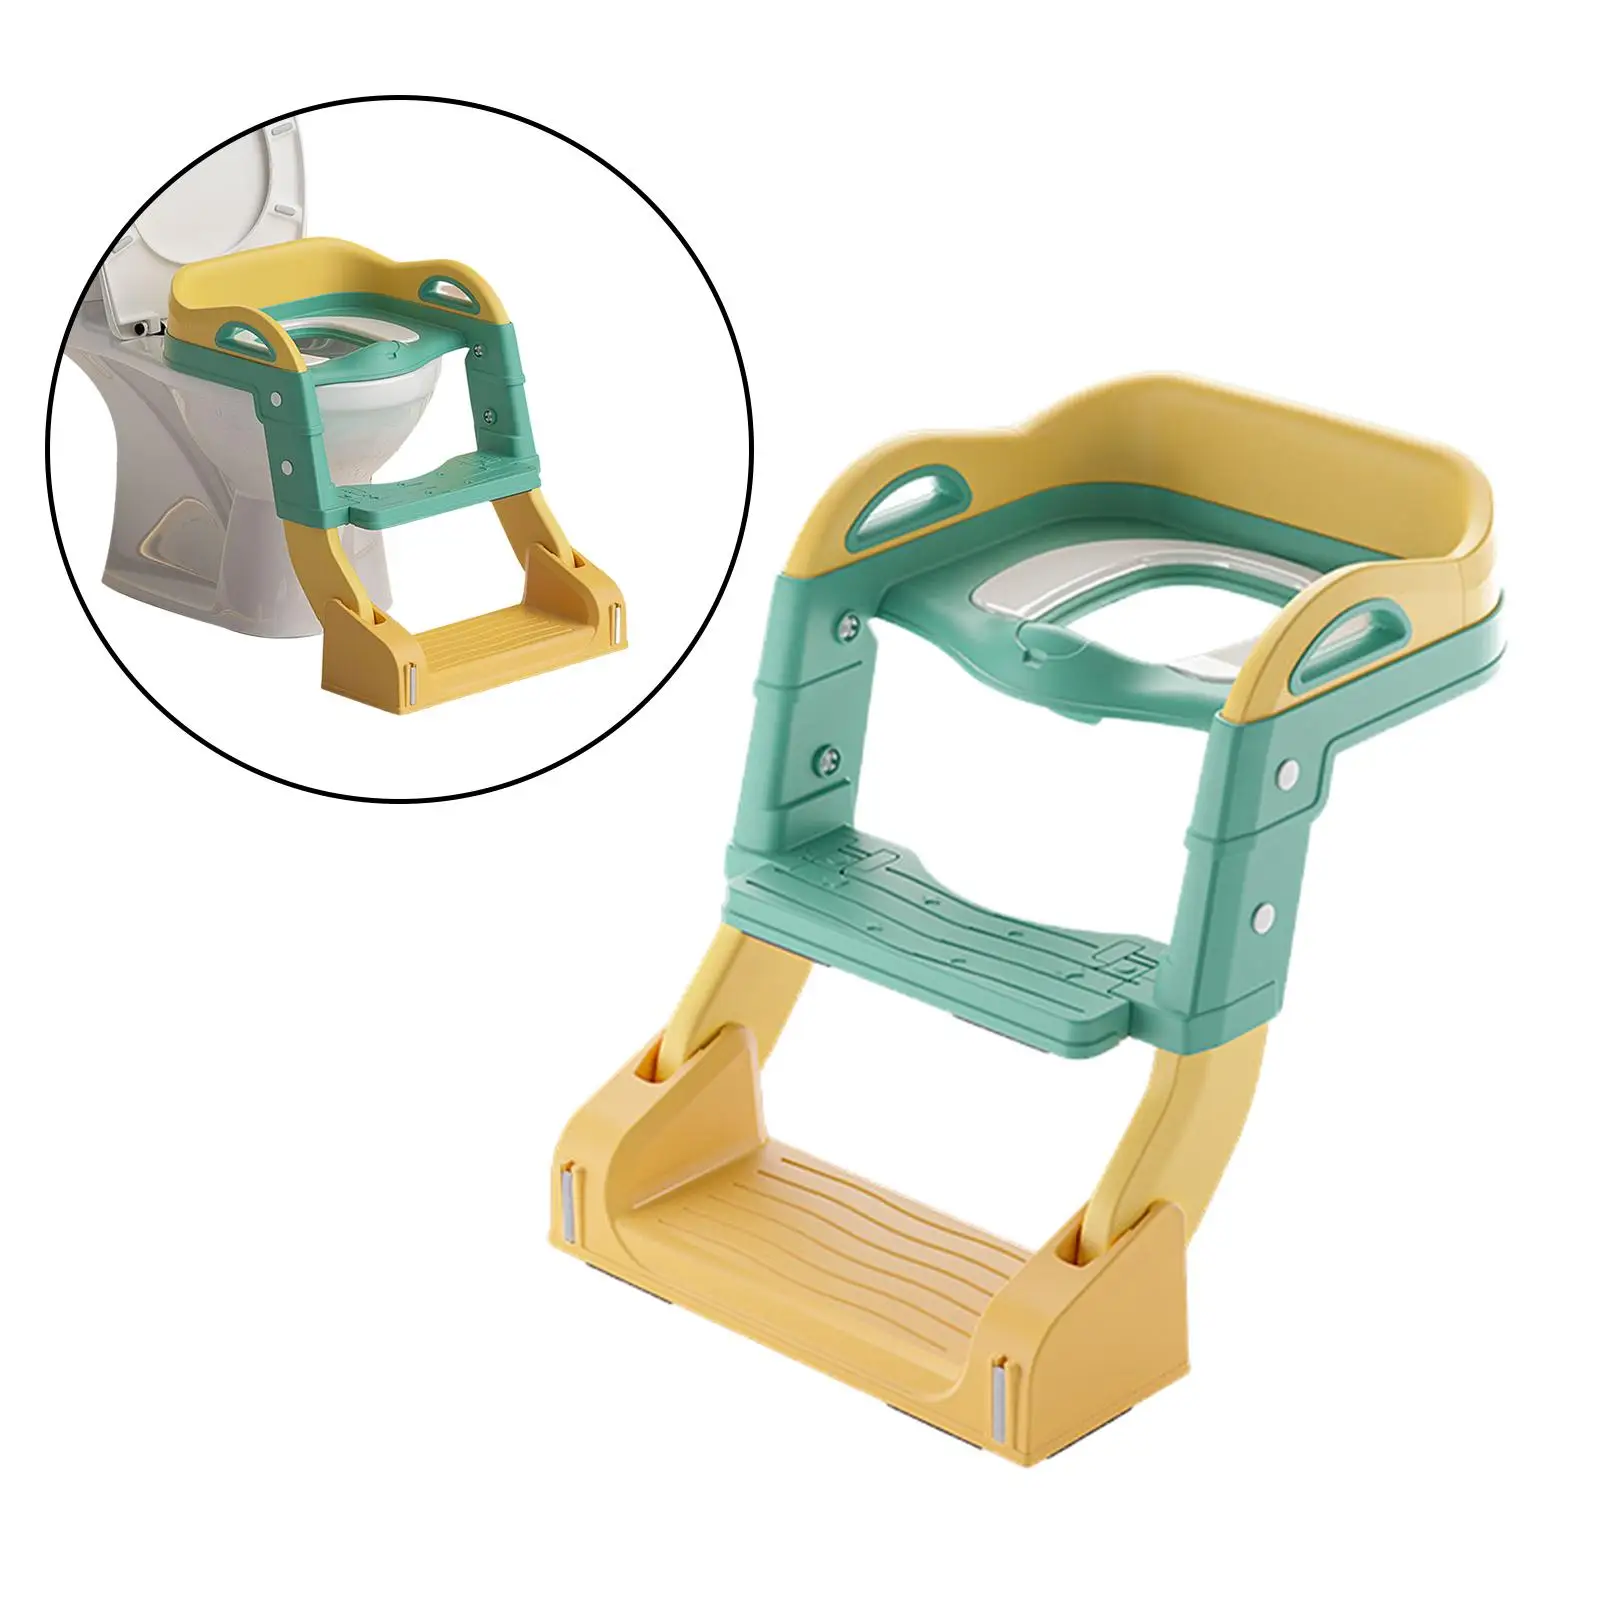 Kids Toilet Training Seat with Step up Ladder Baby Infant Potty Urinal Potty Removable and Washable Soft Seat Cushion Wide Steps